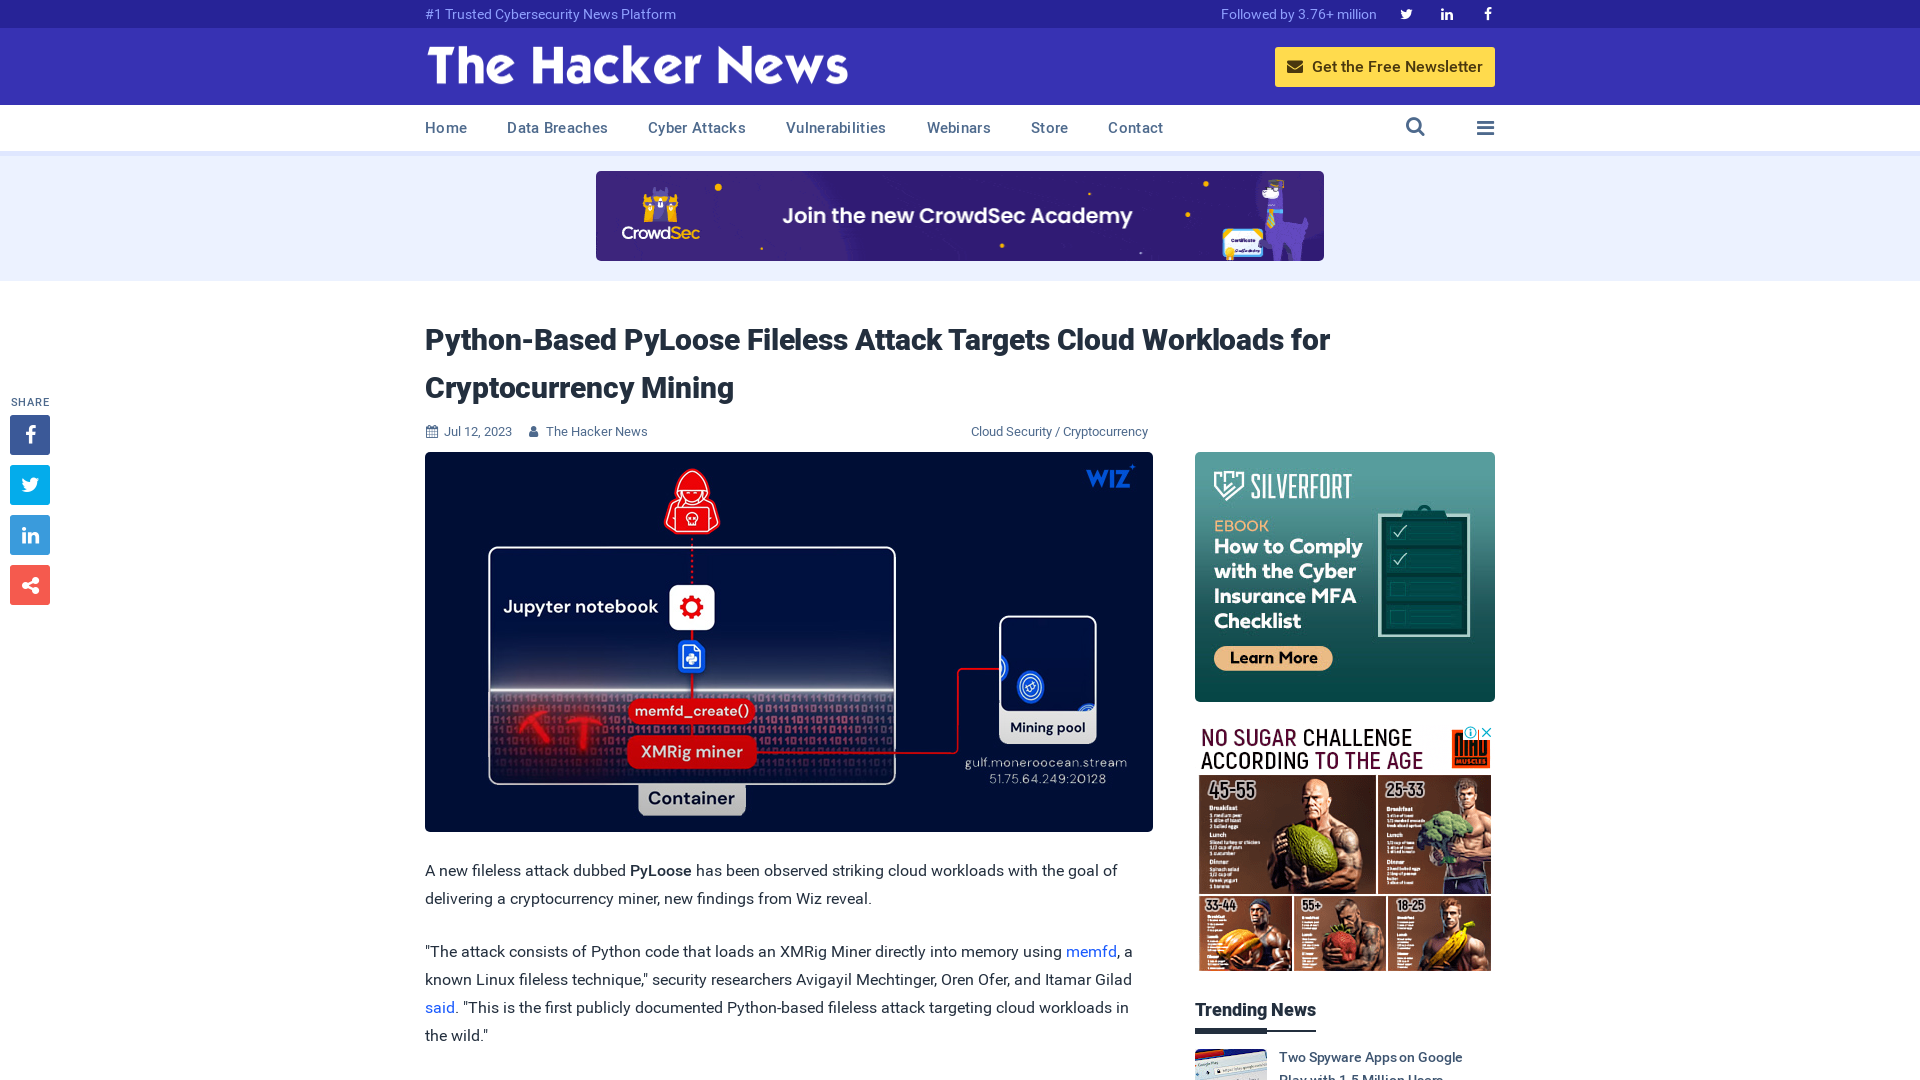 Python-Based PyLoose Fileless Attack Targets Cloud Workloads for Cryptocurrency Mining